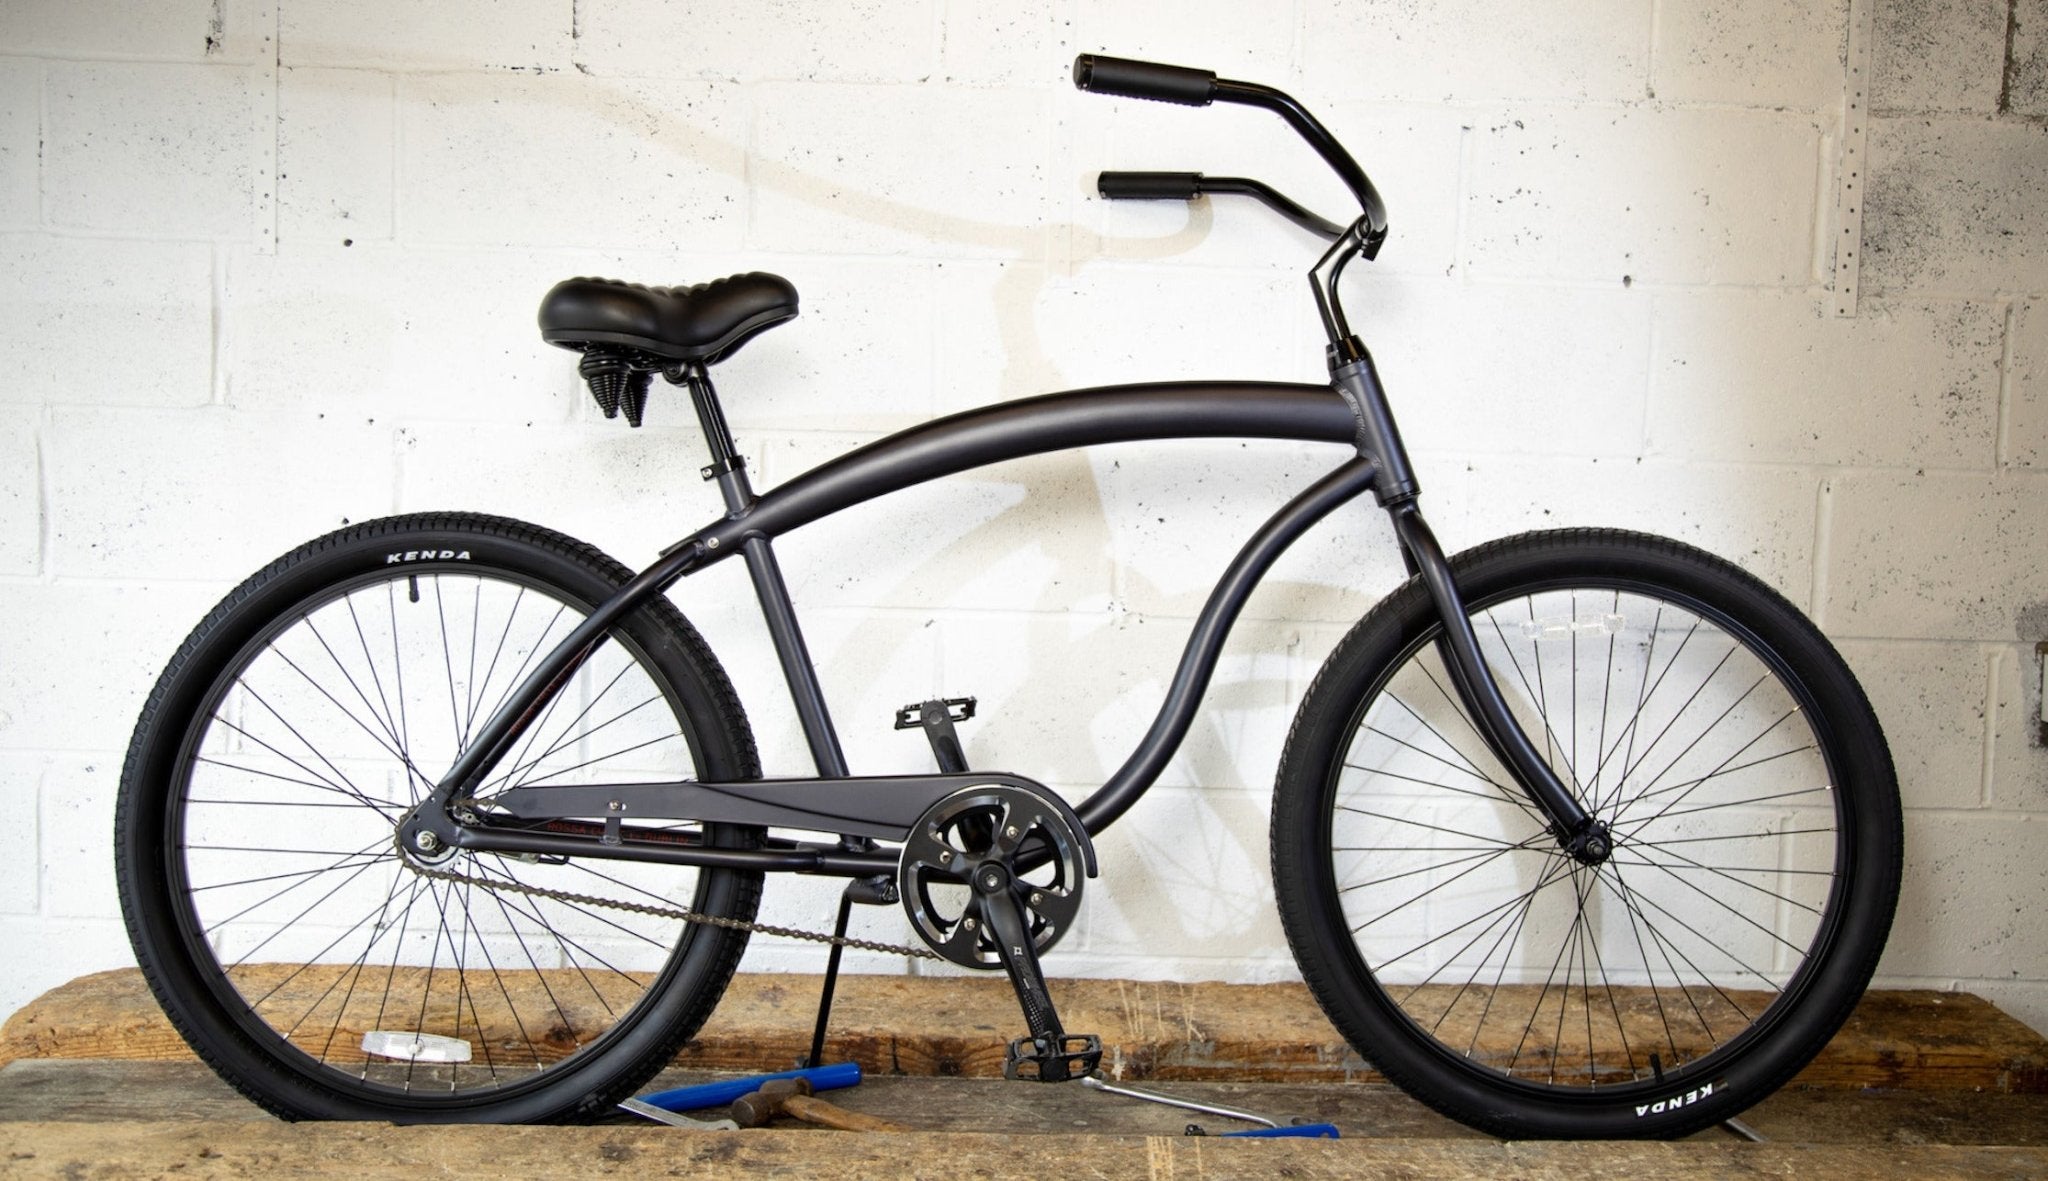 Should You Buy A Beach Cruiser For City Cycling? - Rossa Cycles